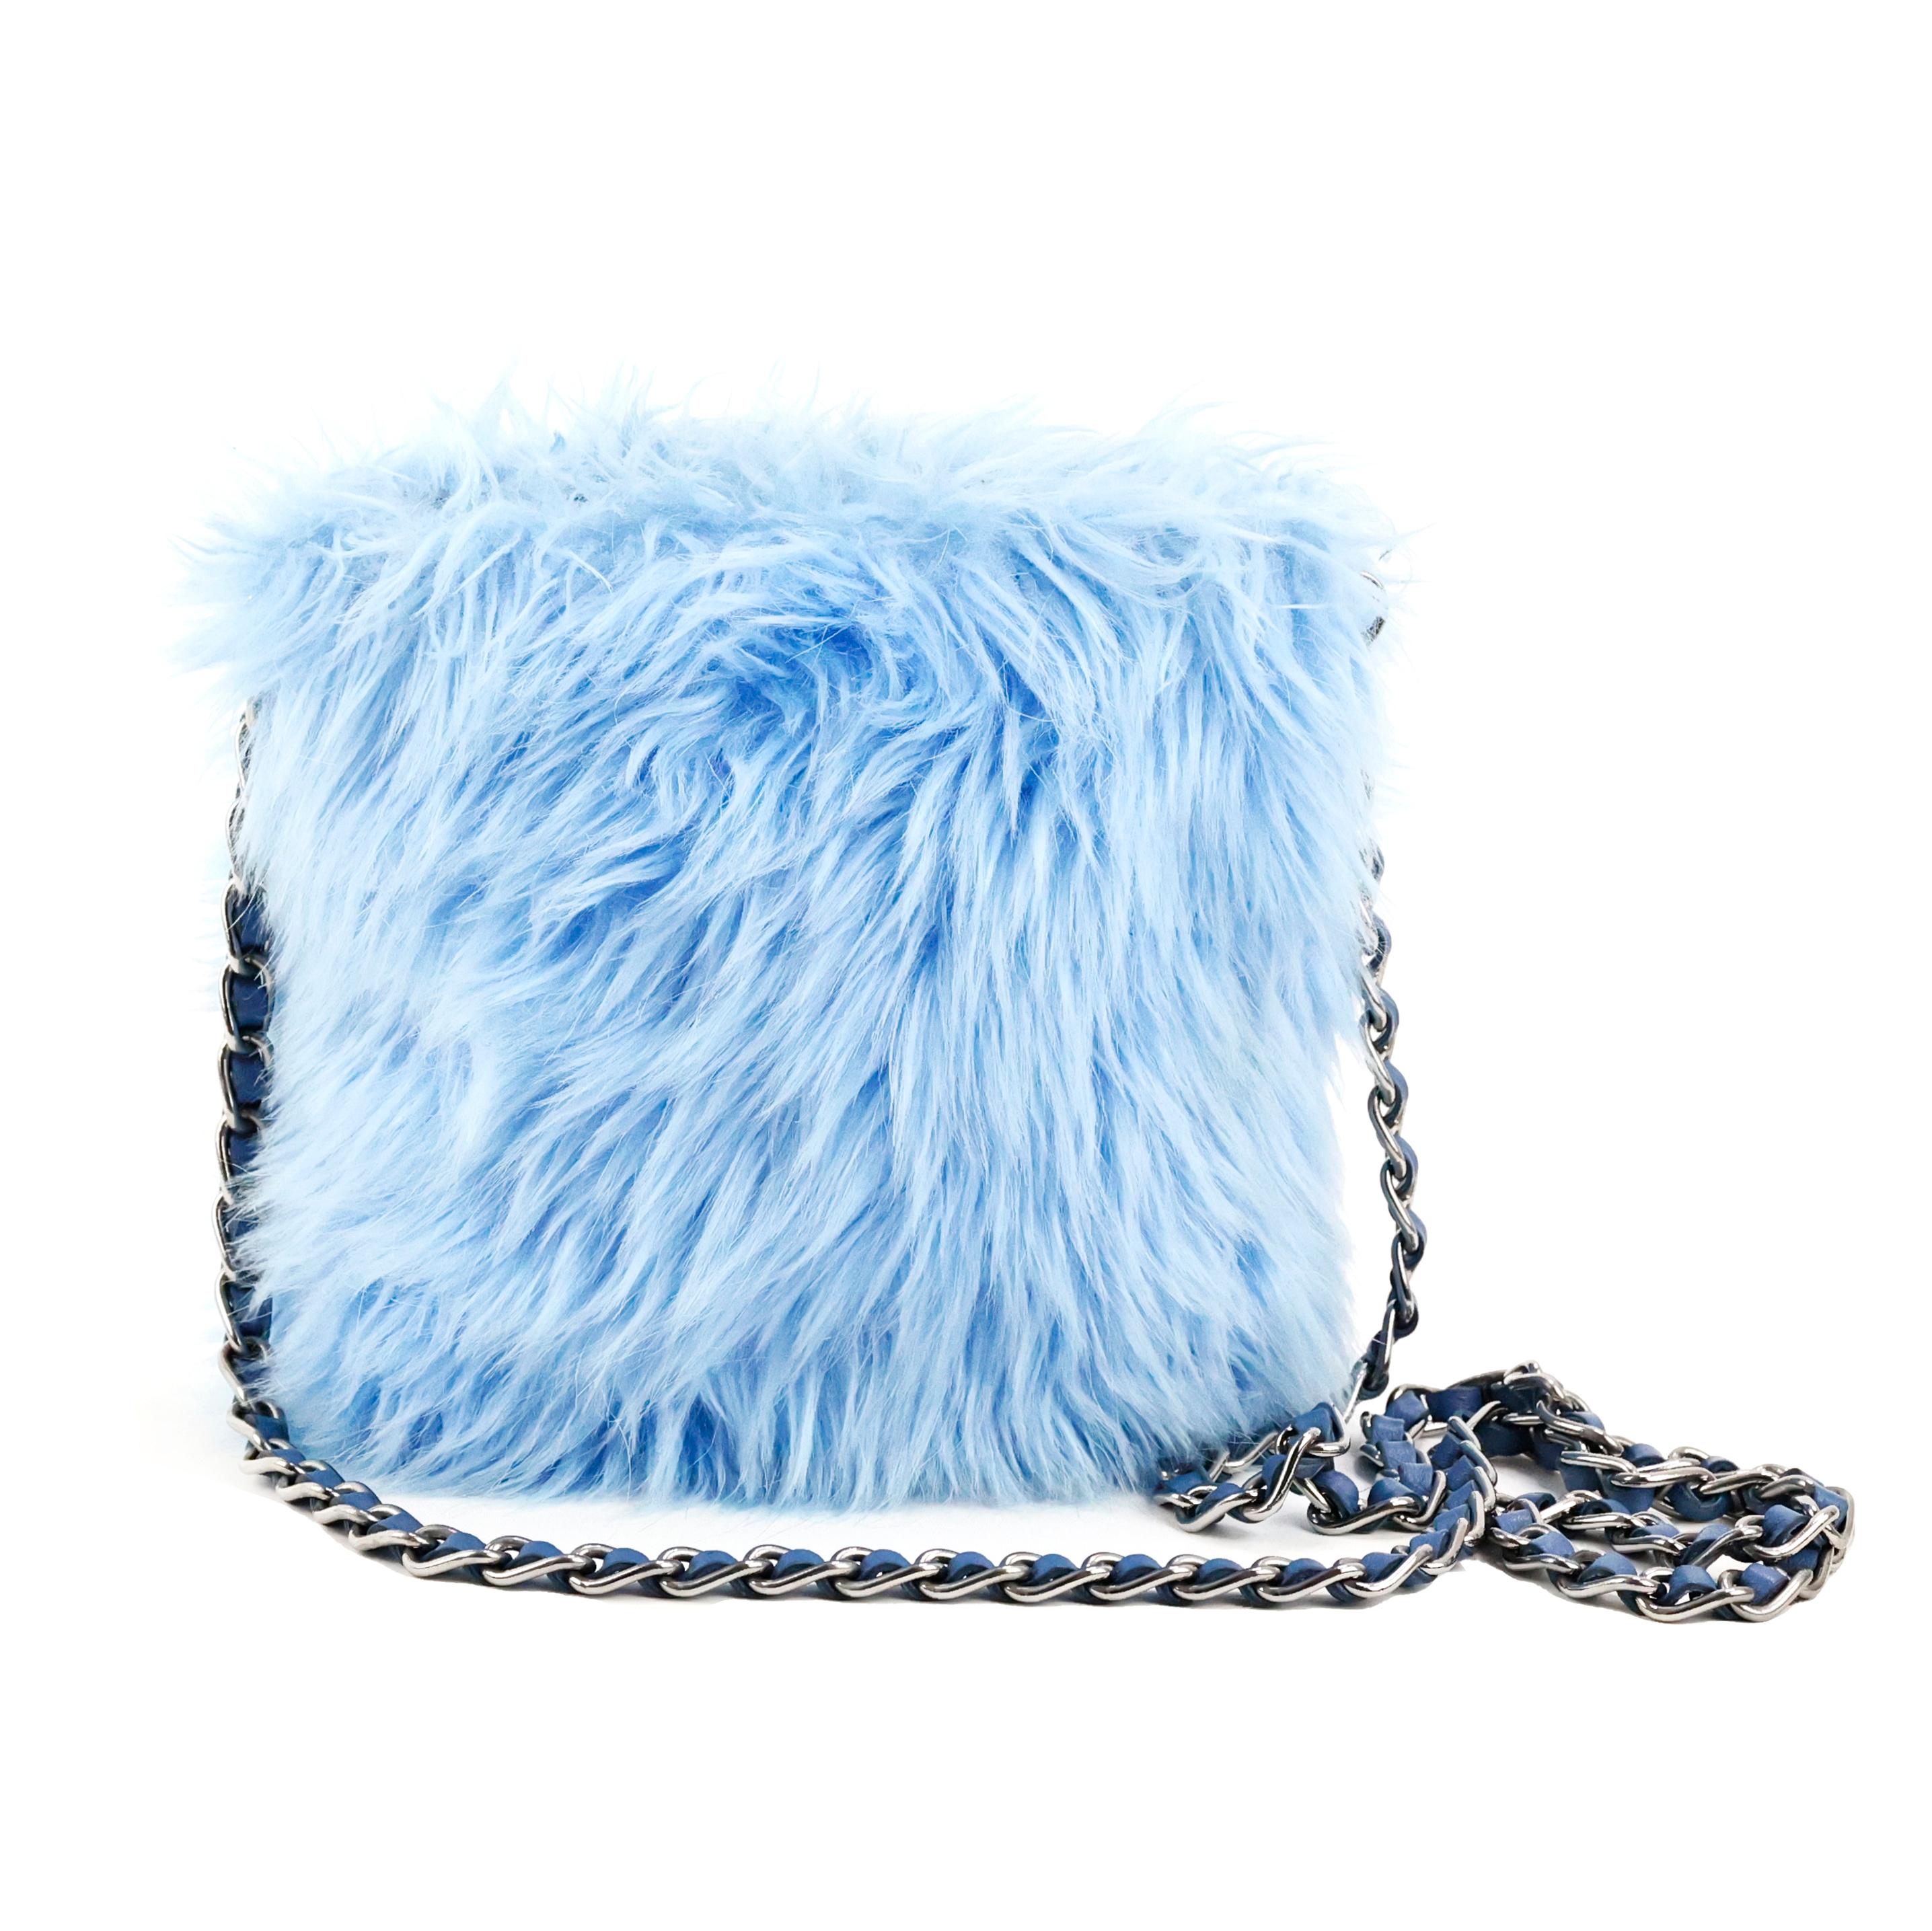 Prada chain crossbody bag in faux fur and leather color blue.

Condition:
Really good.

Packing/accessories:
Box.

Measurements:
20cm x 20cm x 6cm